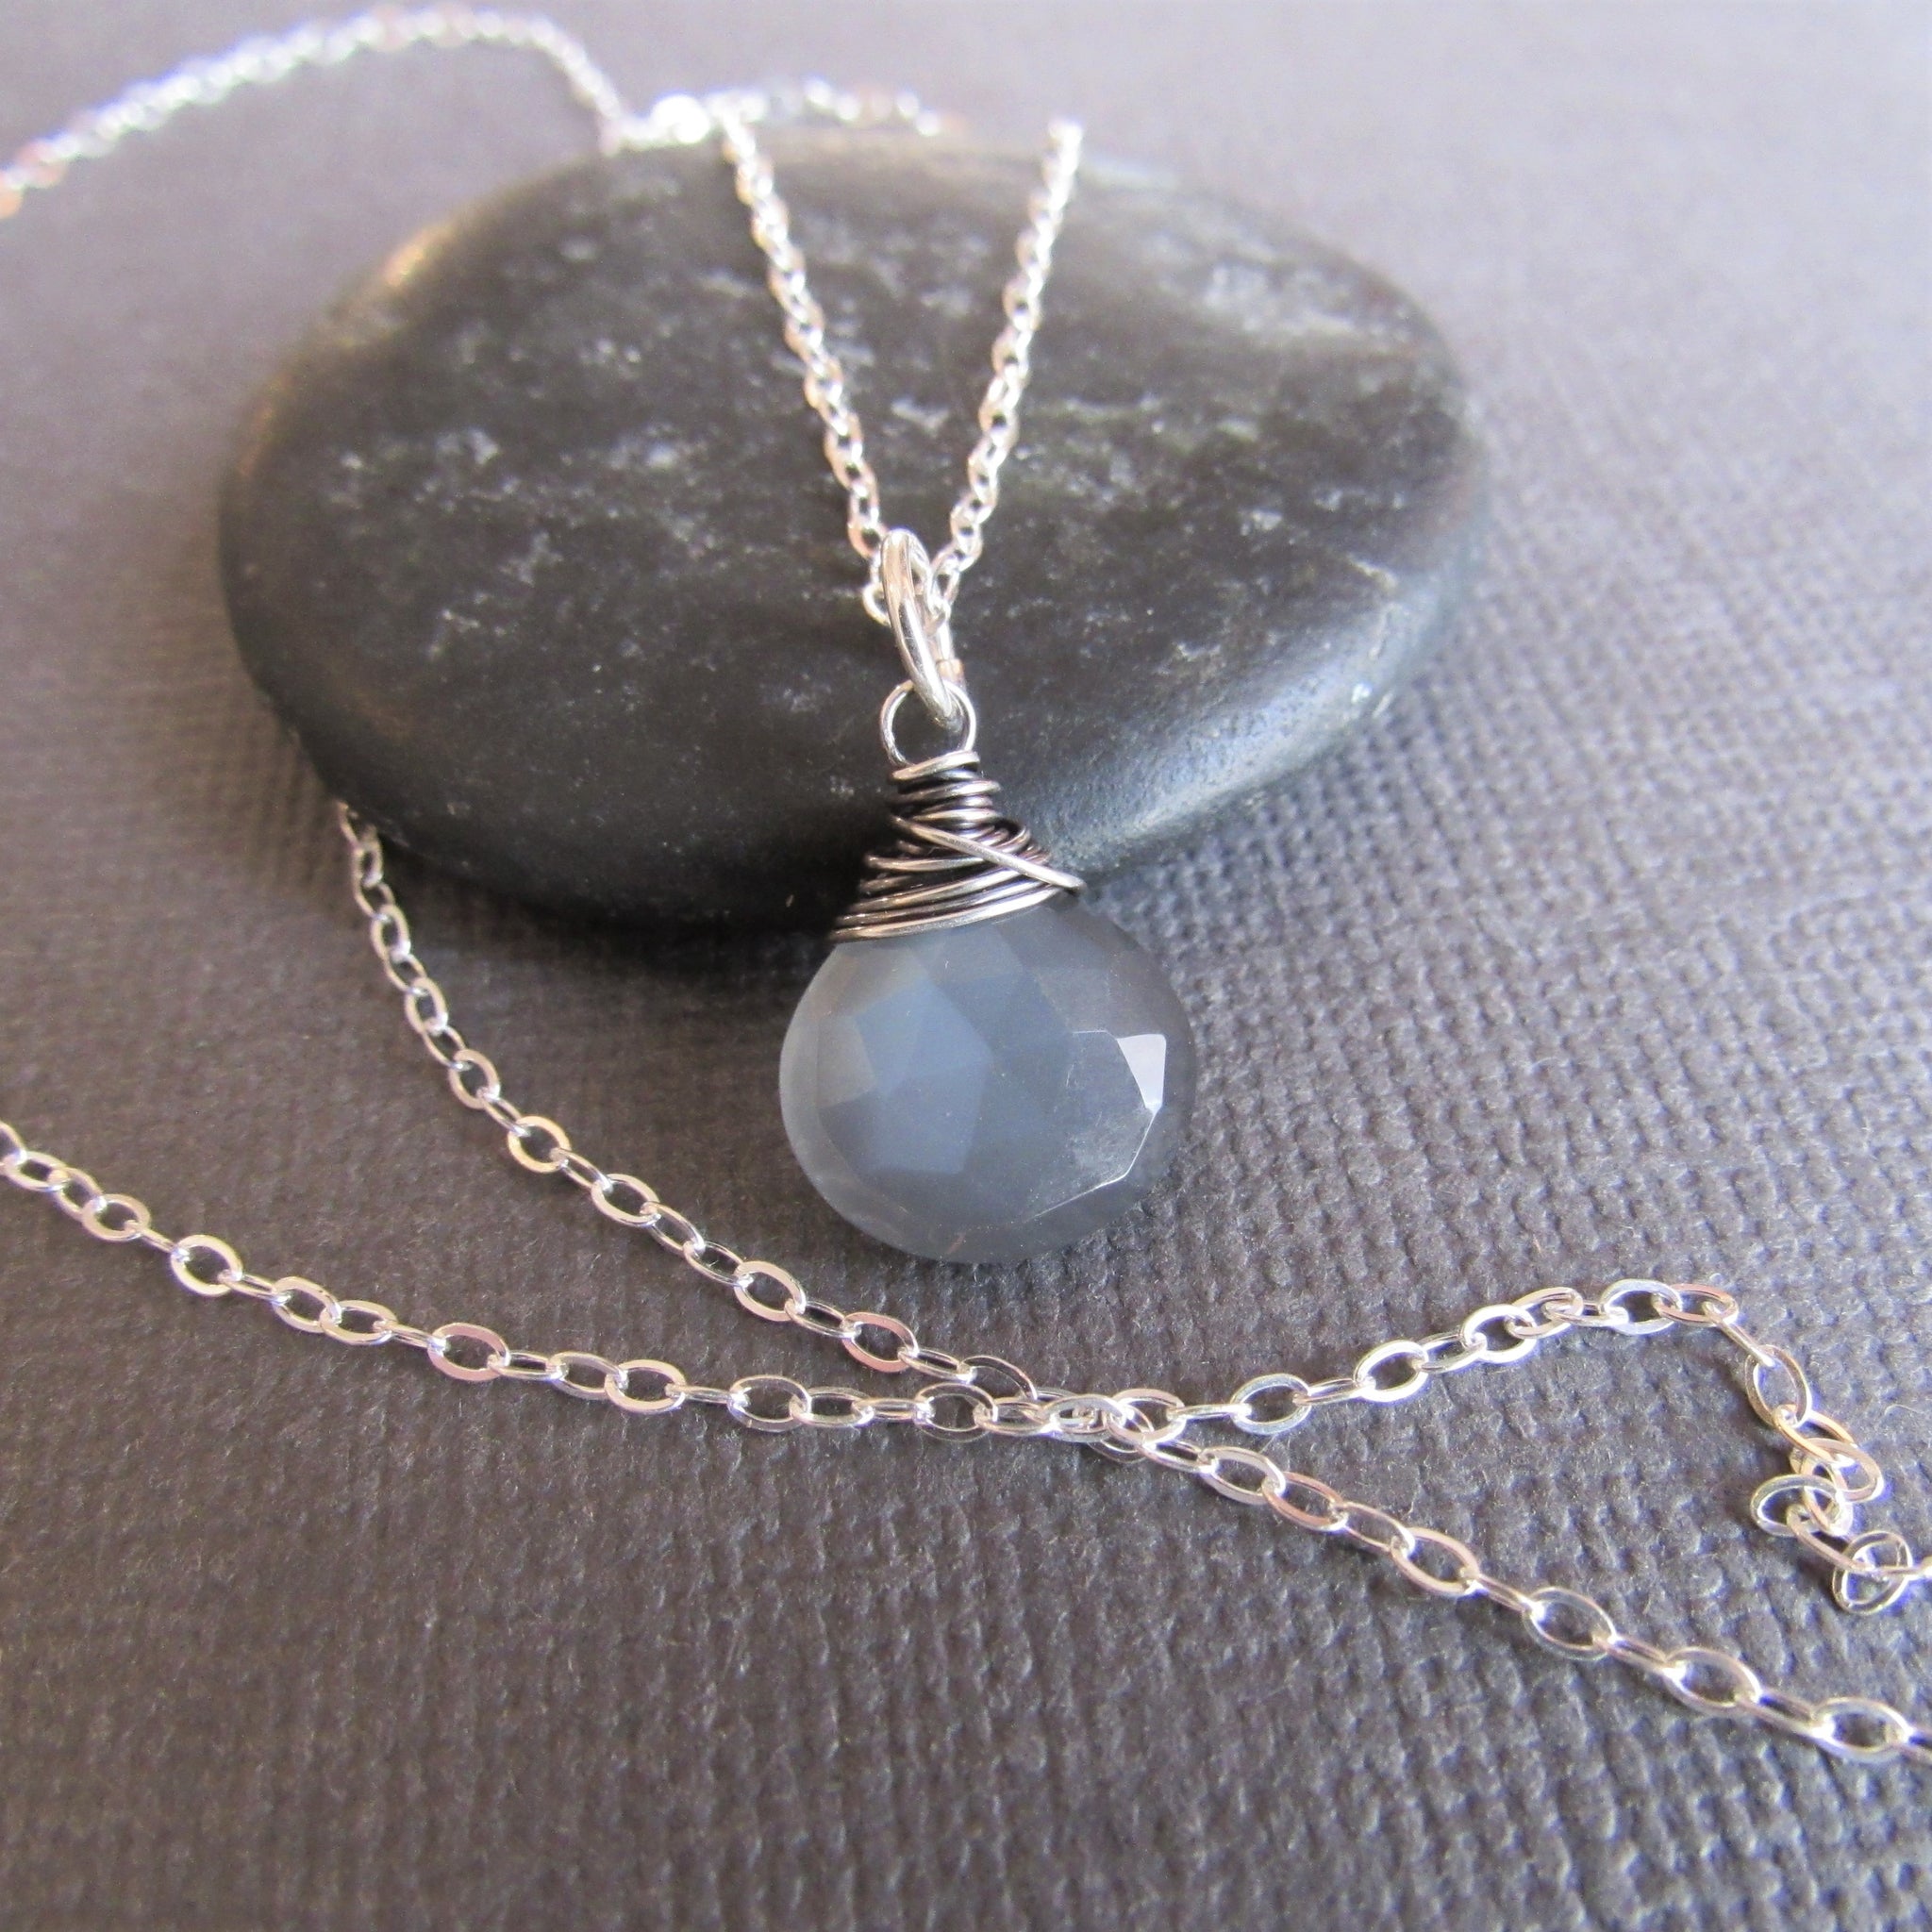 Black and White Moonstone Necklace for Embracing Change and New Beginnings